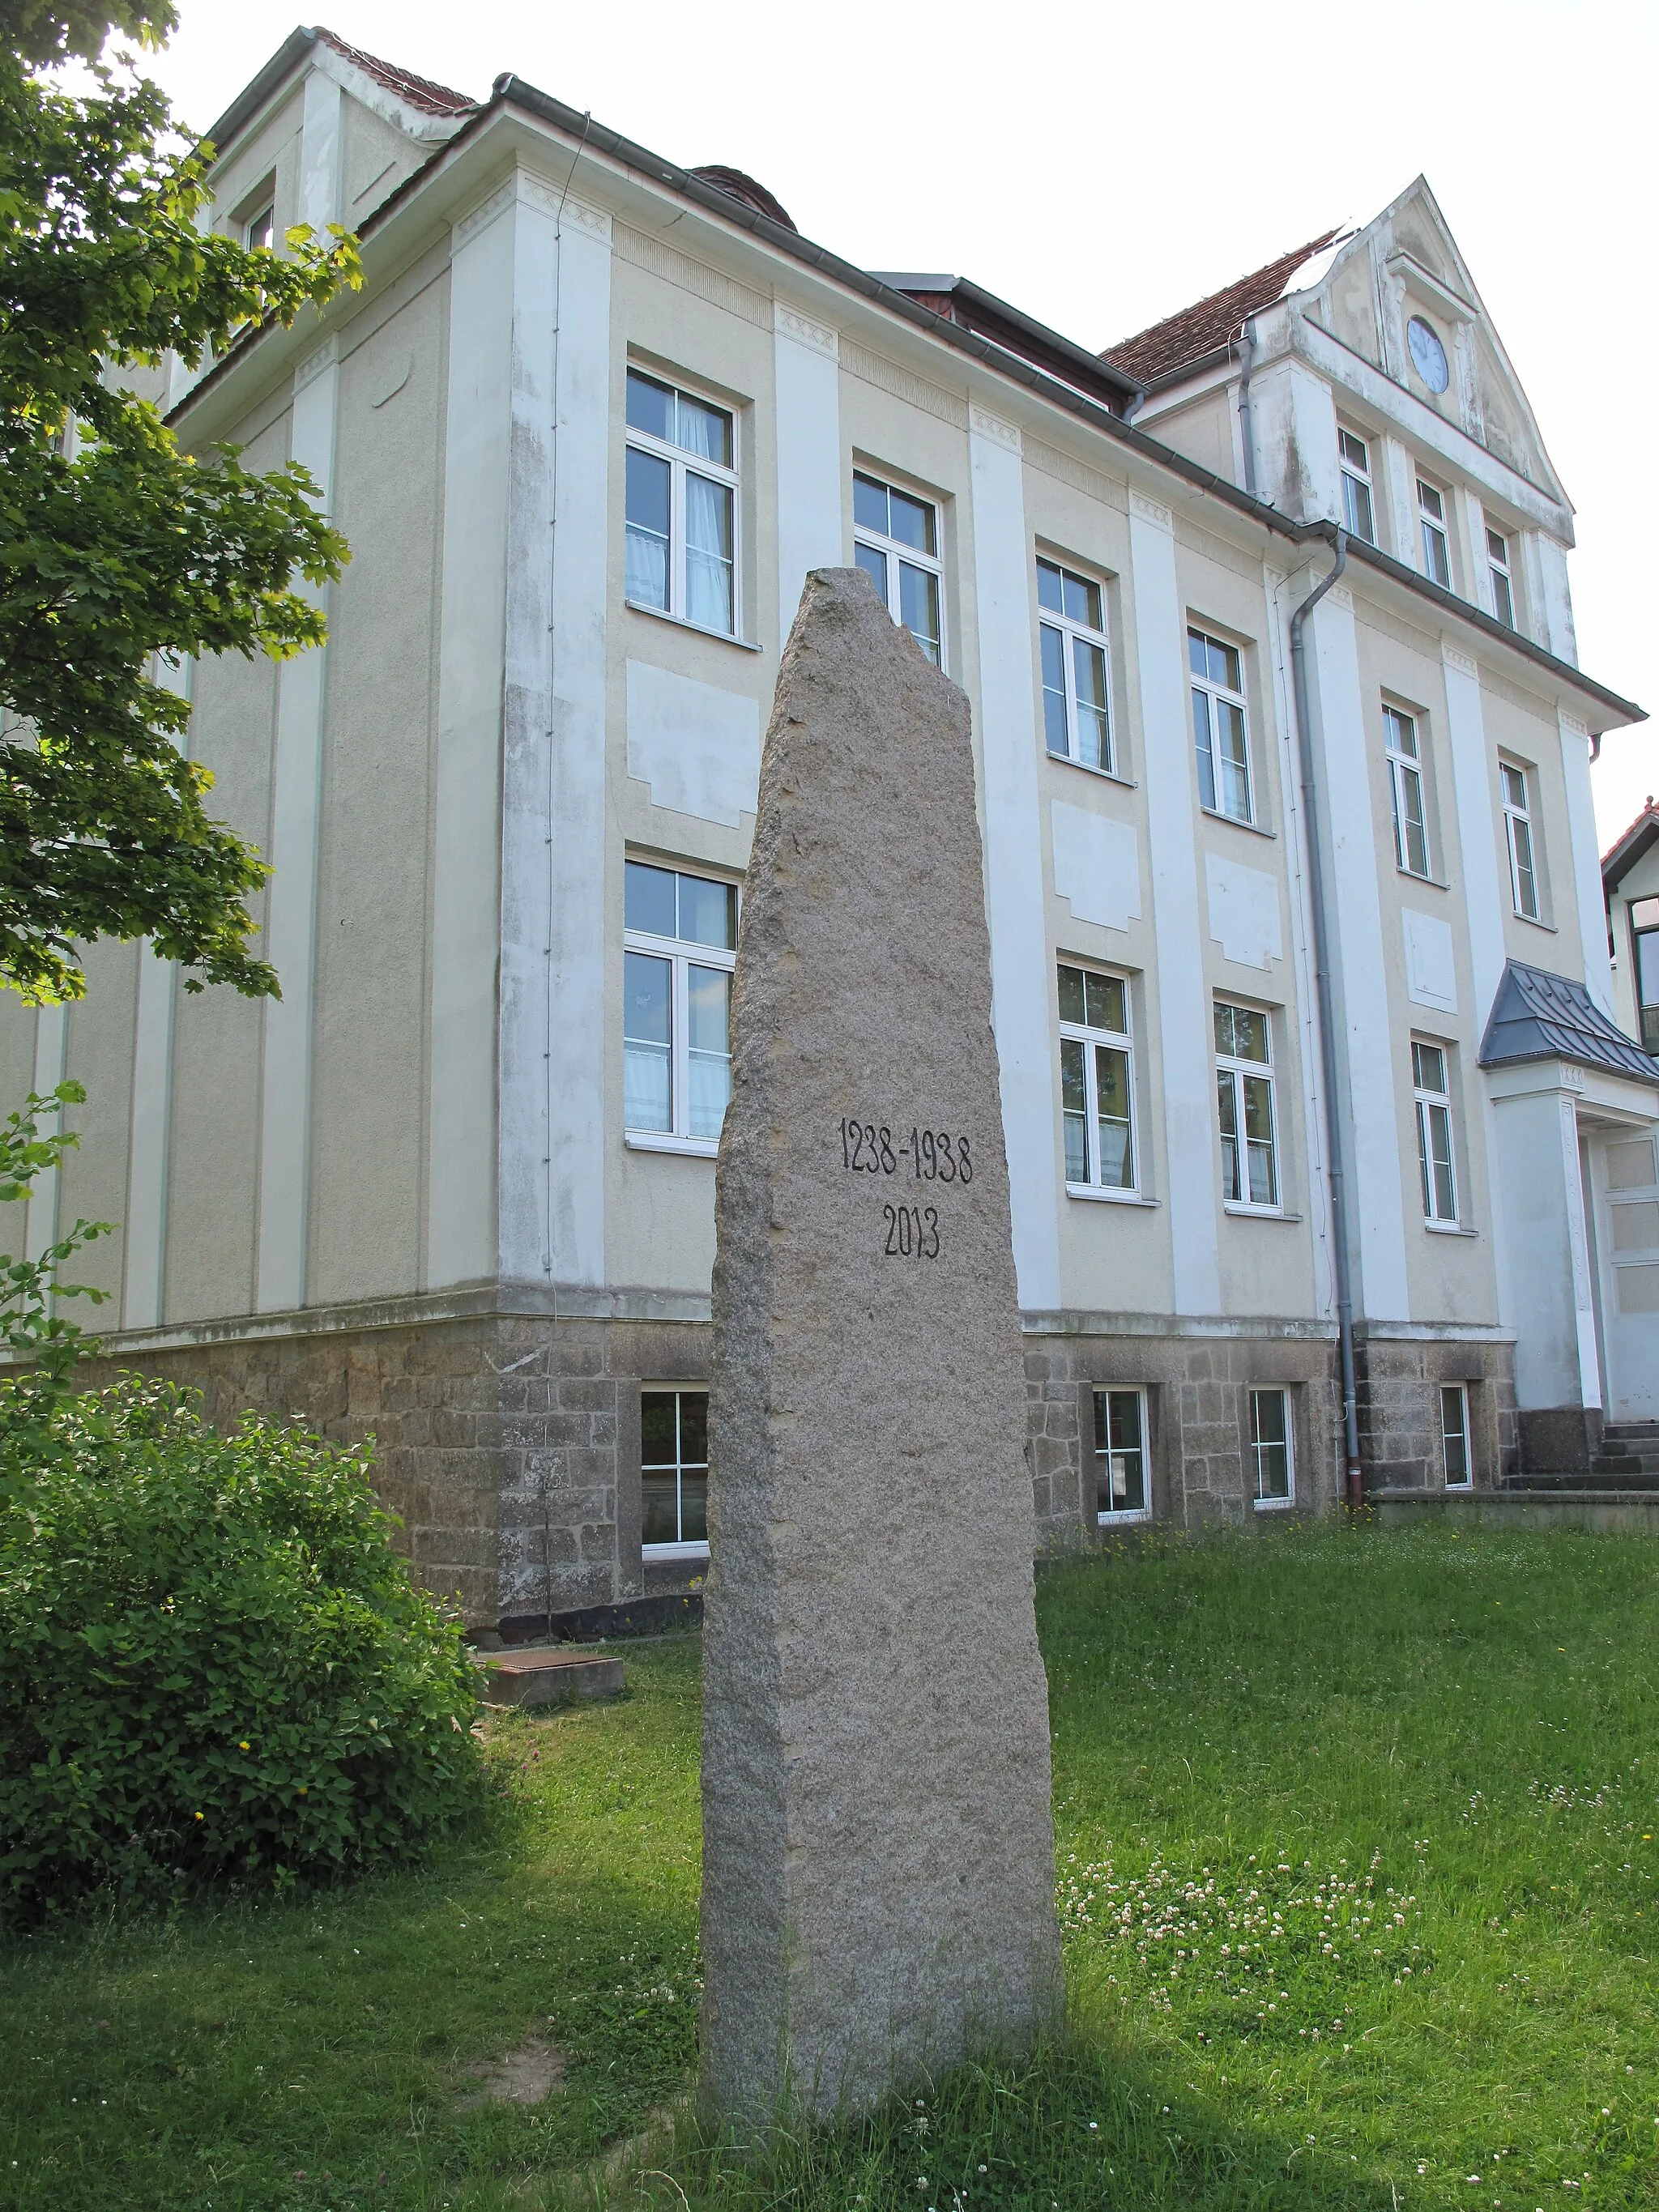 Photo showing: Memorial stone of 700 years Reichenbach 1238–1938 / 2013 in Reichenbach/O.L.